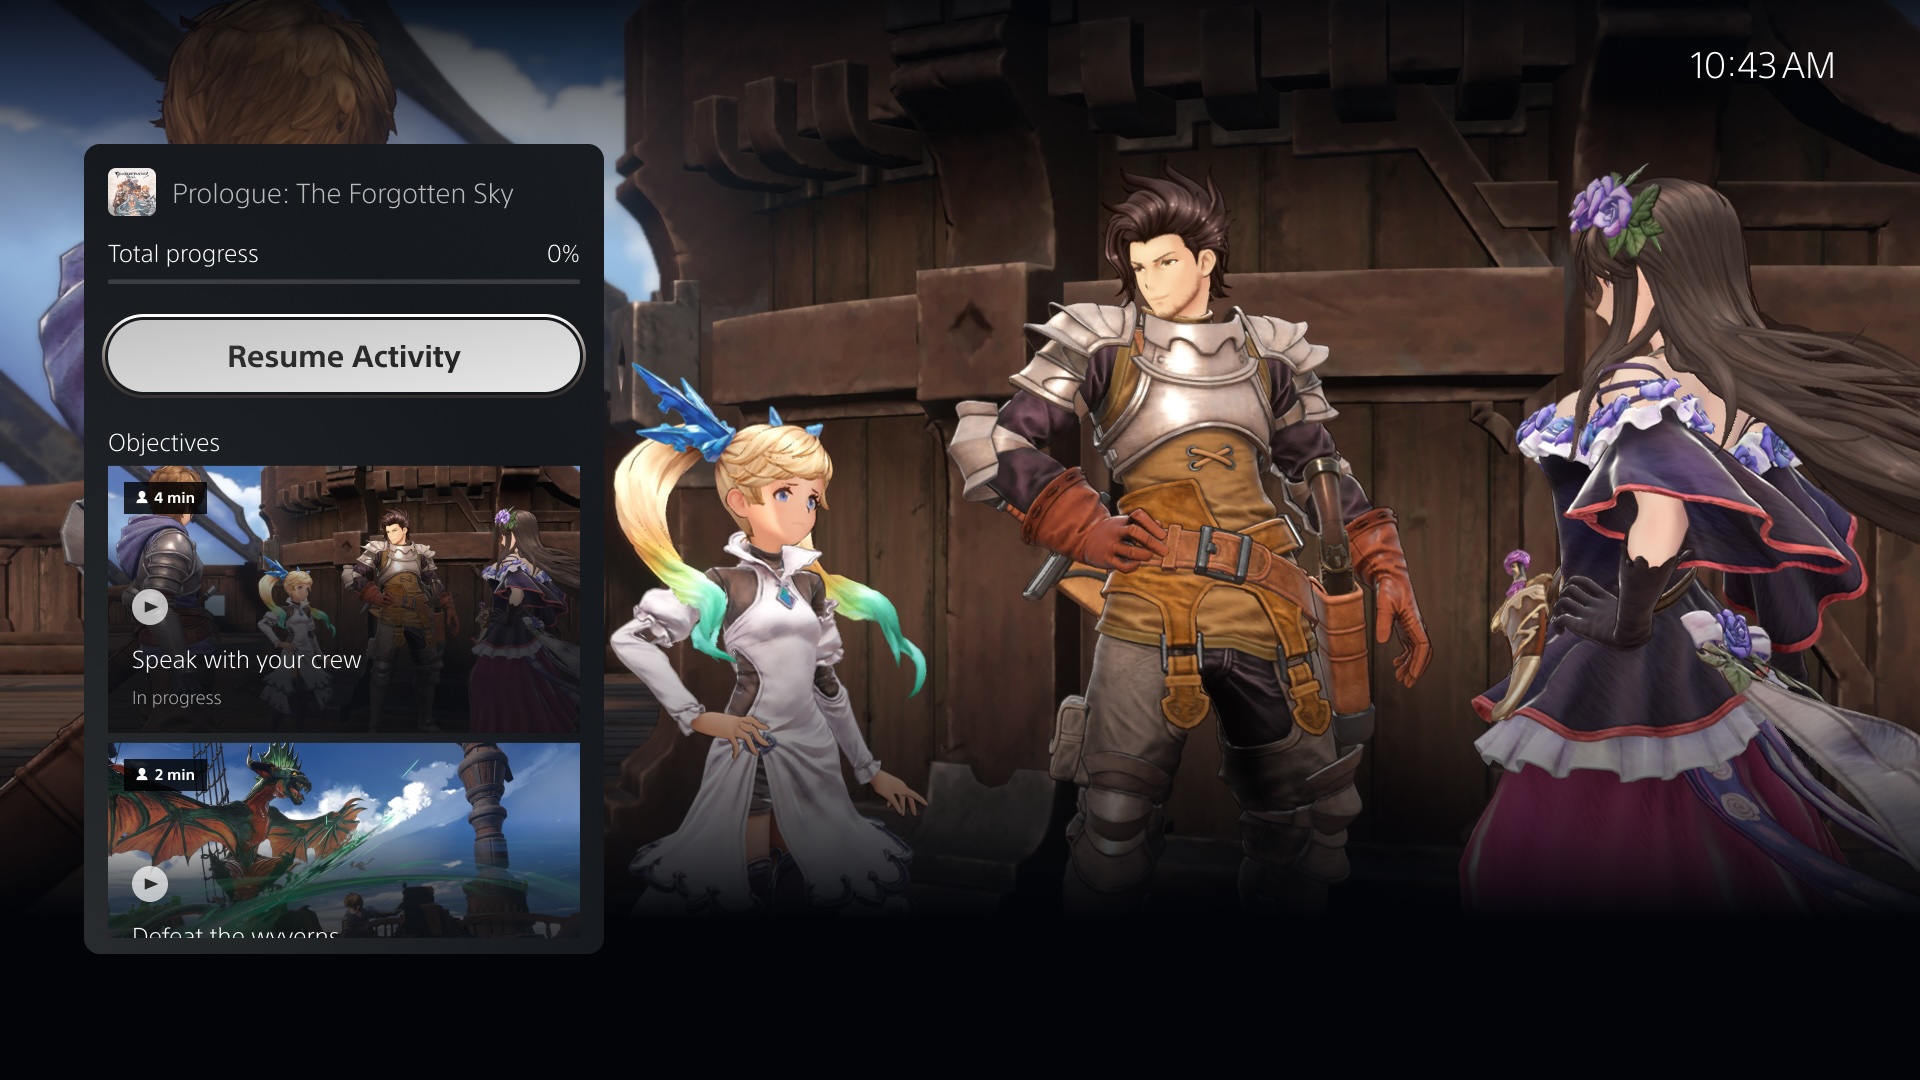  "PS5 UI screenshot showing Community Game Help for Granblue Fantasy: Relink"